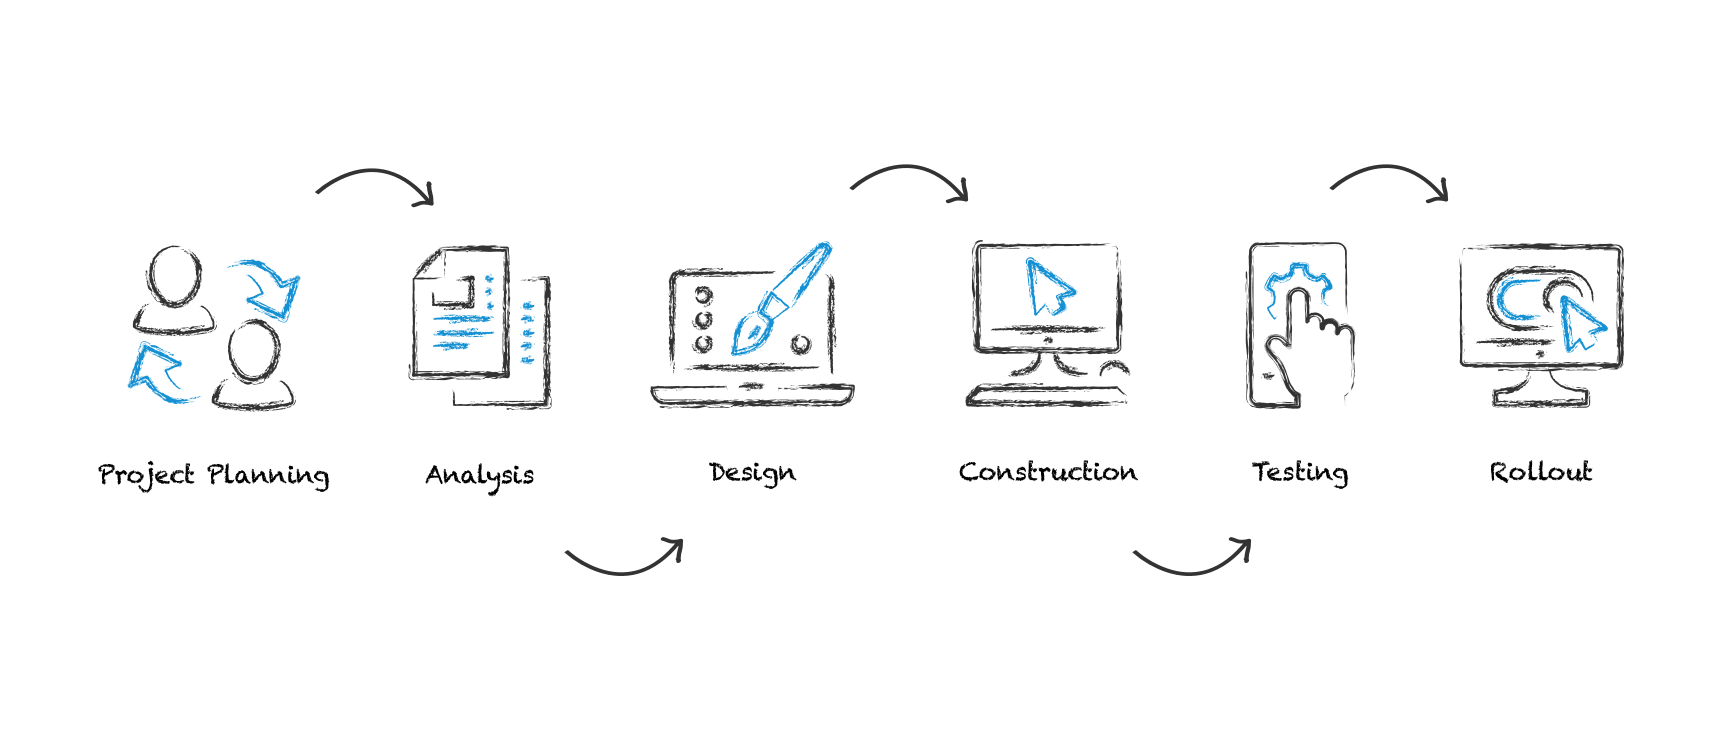 Stages of the Software Development Life Cycle | LITSLINK Blog